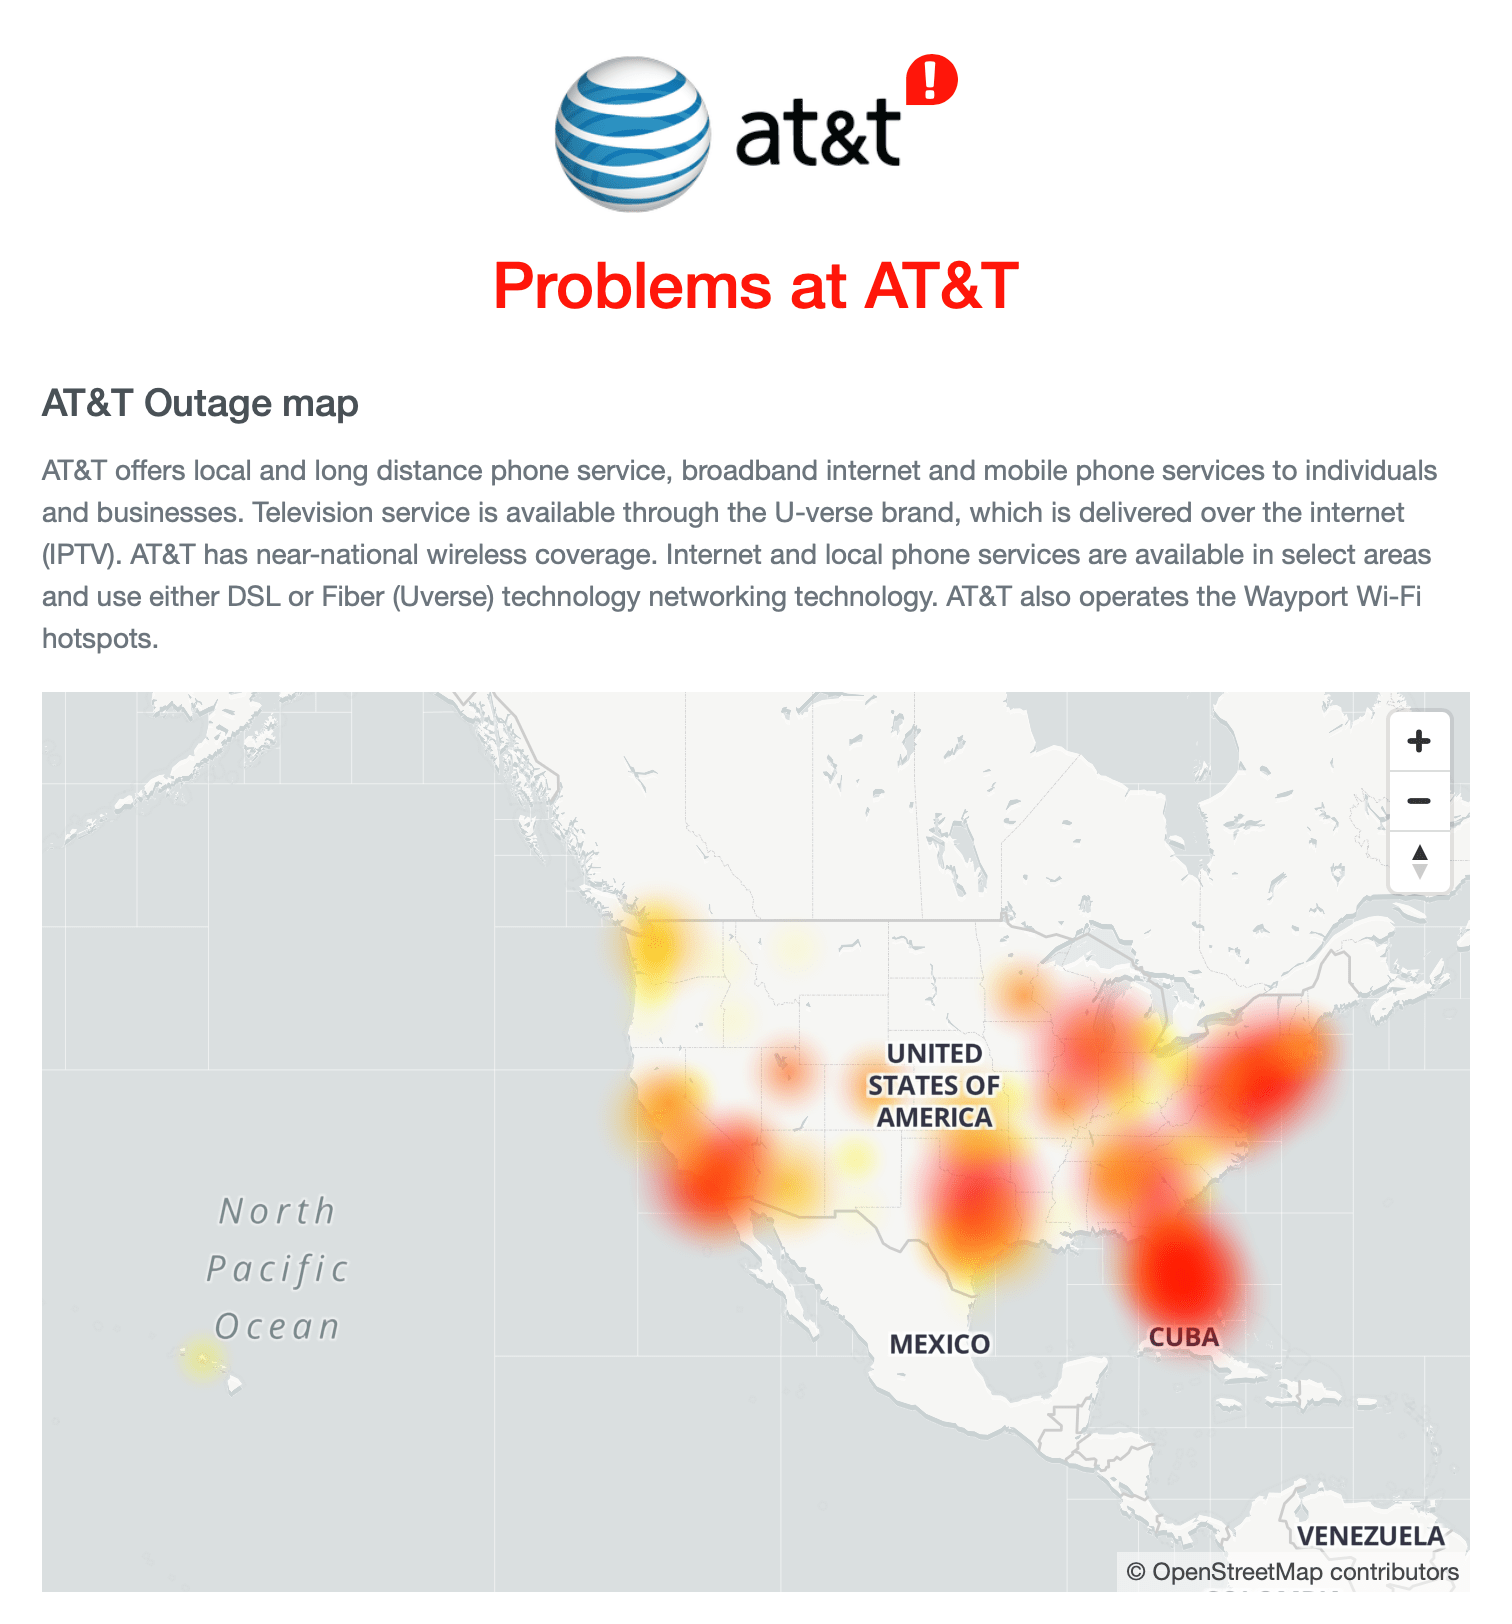 Outage hits TMobile, Verizon, AT&T, and Sprint 9to5Mac